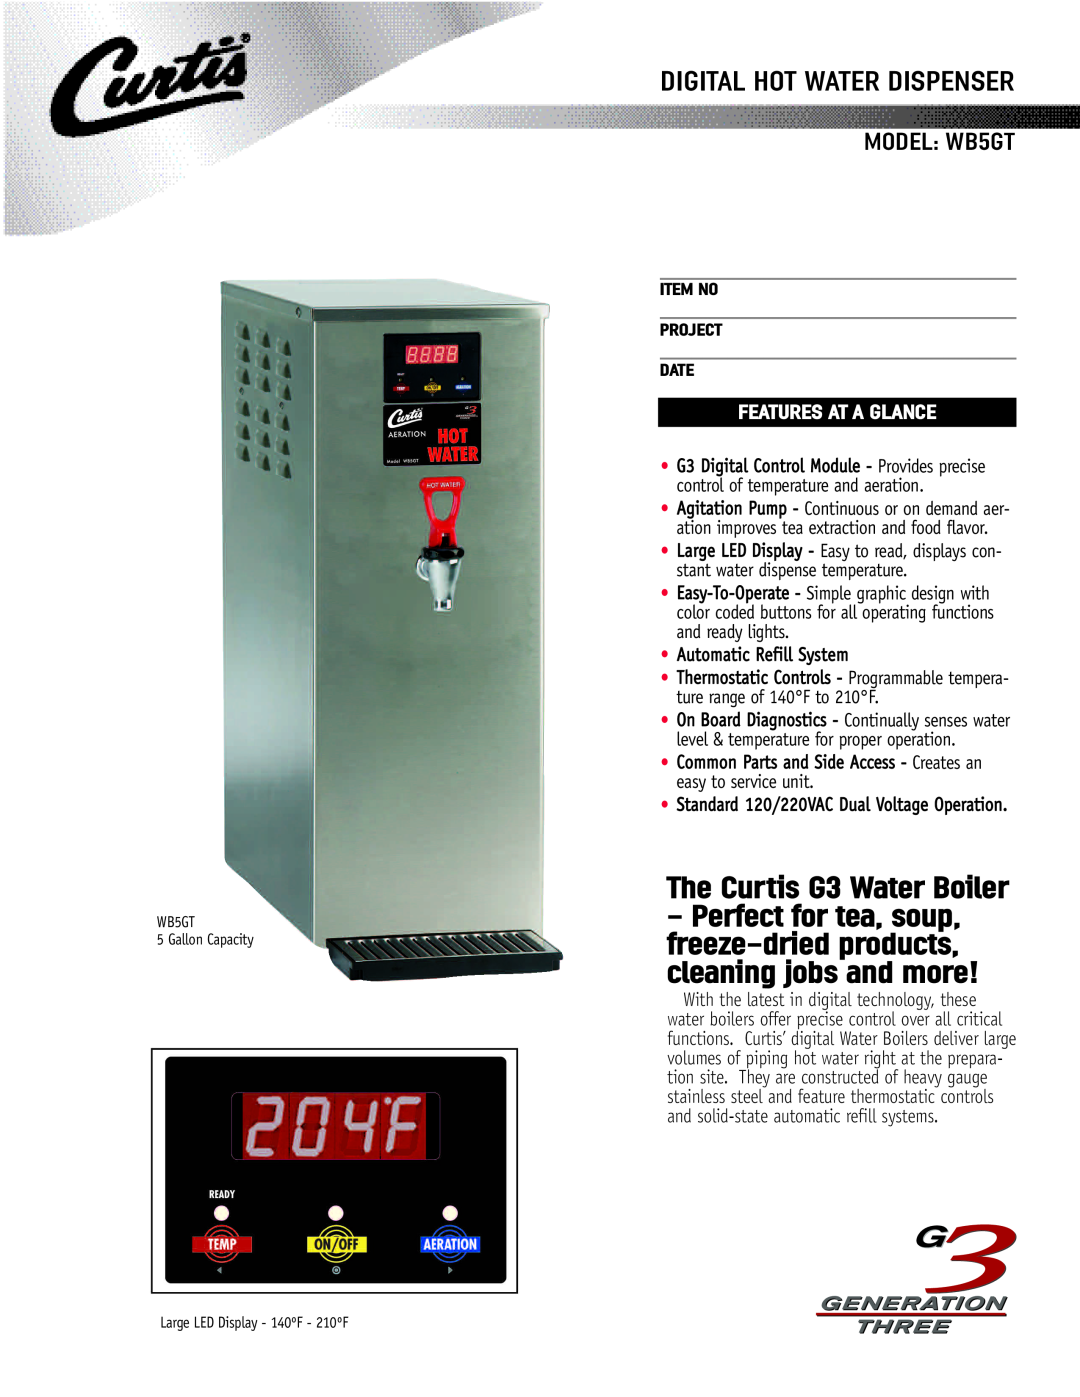 Wibur Curtis Company manual The Curtis G3 Water Boiler, DIGITAL HOT WATER DISPENSER MODEL WB5GT, Features At A Glance 